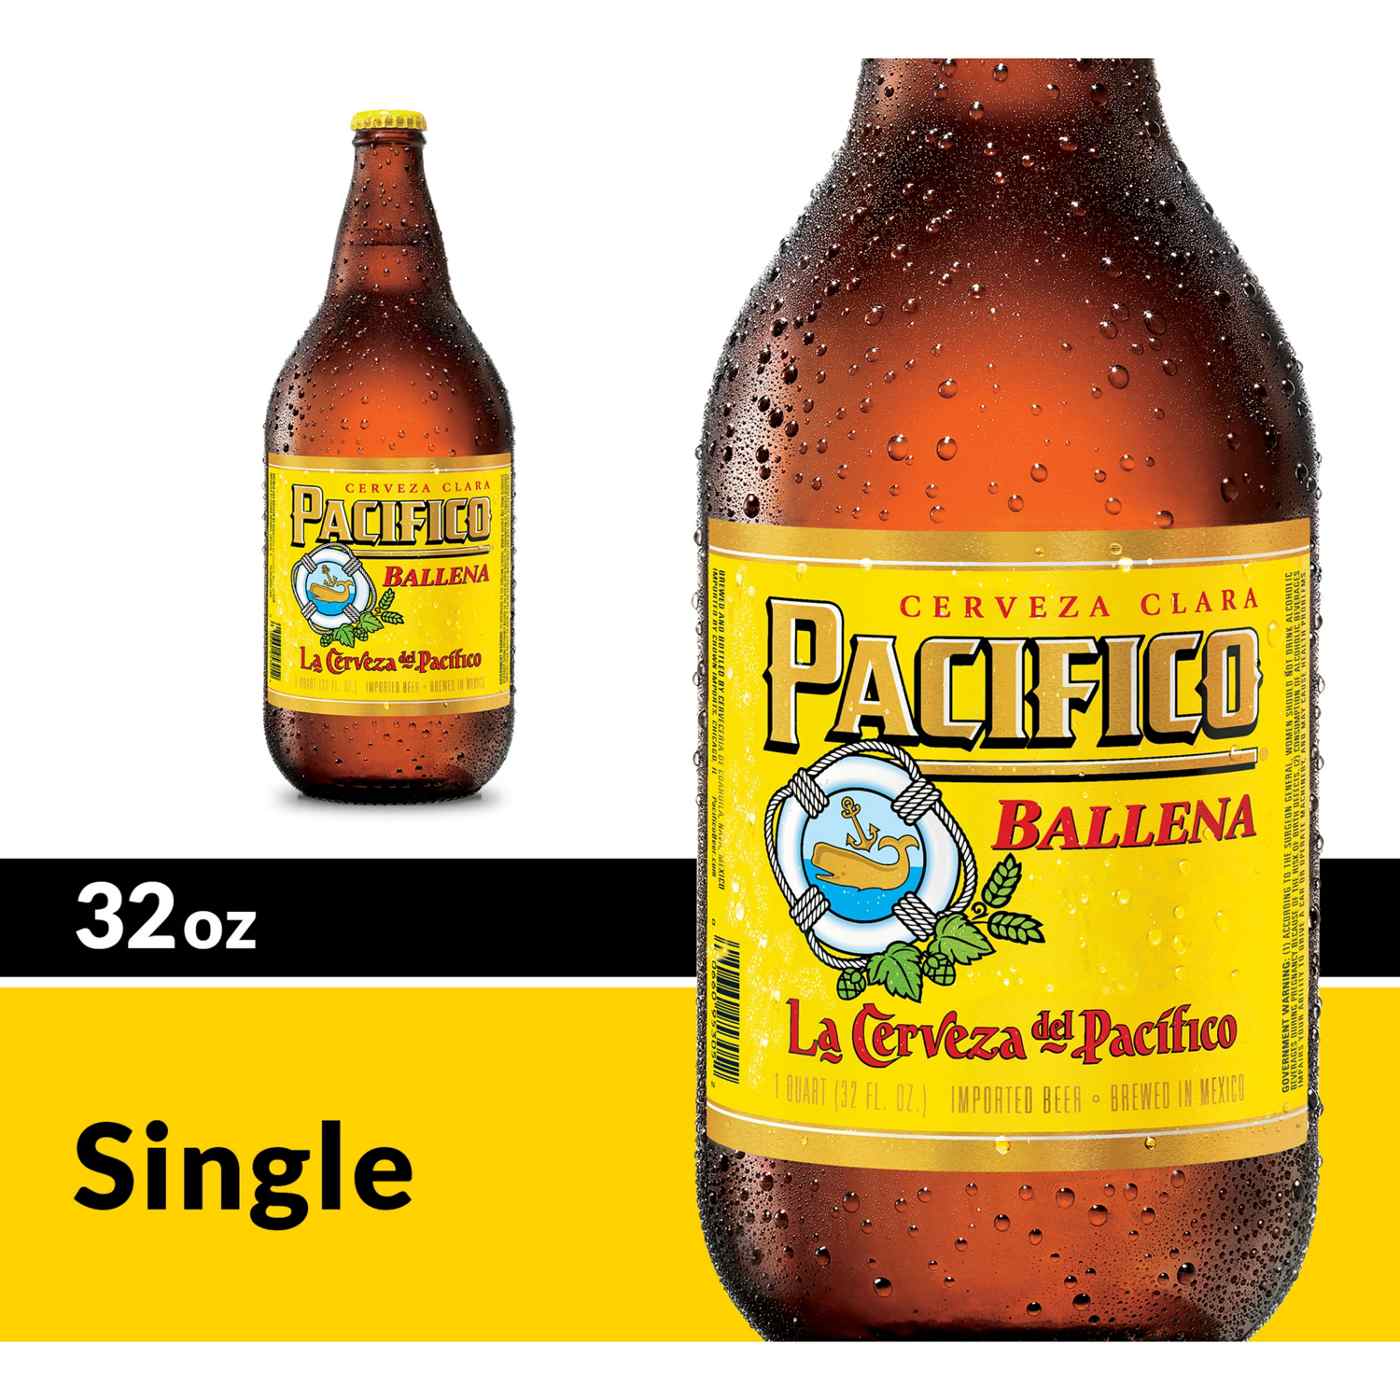 Pacifico Clara Ballena Mexican Lager Import Beer 32 oz Bottle; image 4 of 9